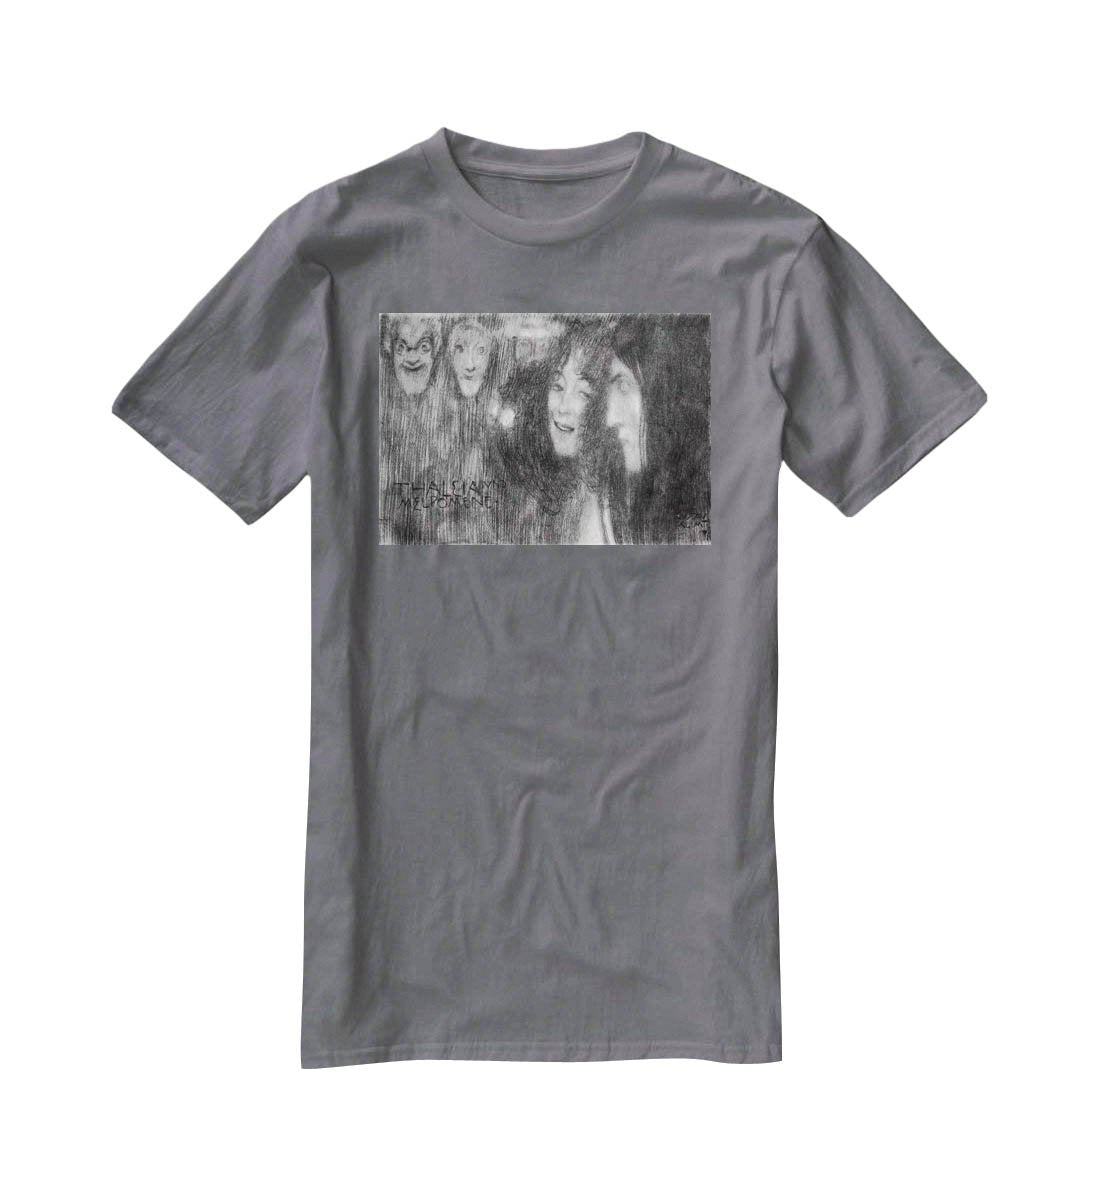 Two girls heads in profile and masks Thalia and Melpomene by Klimt T-Shirt - Canvas Art Rocks - 3